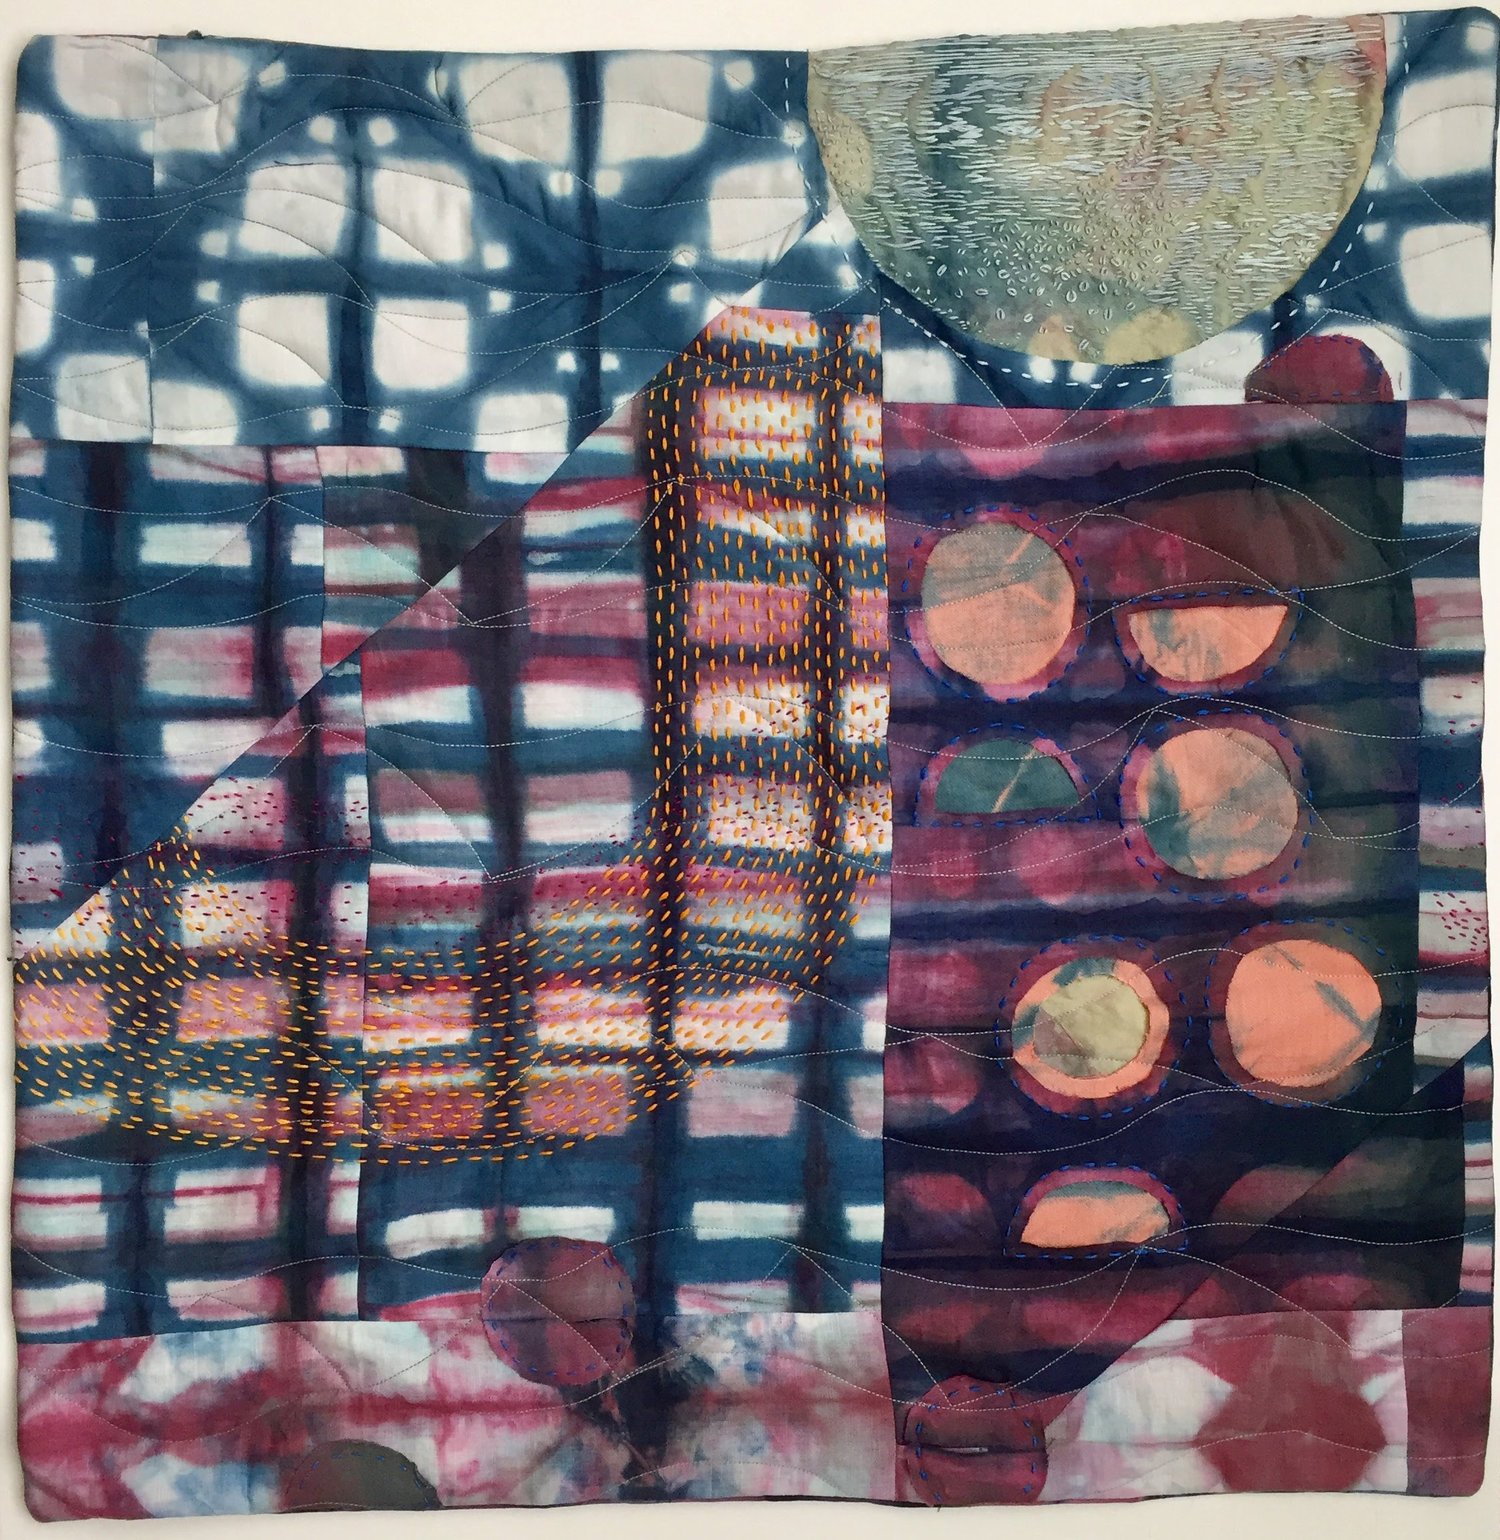    Moonlight Reflections  , shibori dye, appliqué, embroidery and quilting, 24” x 24” 